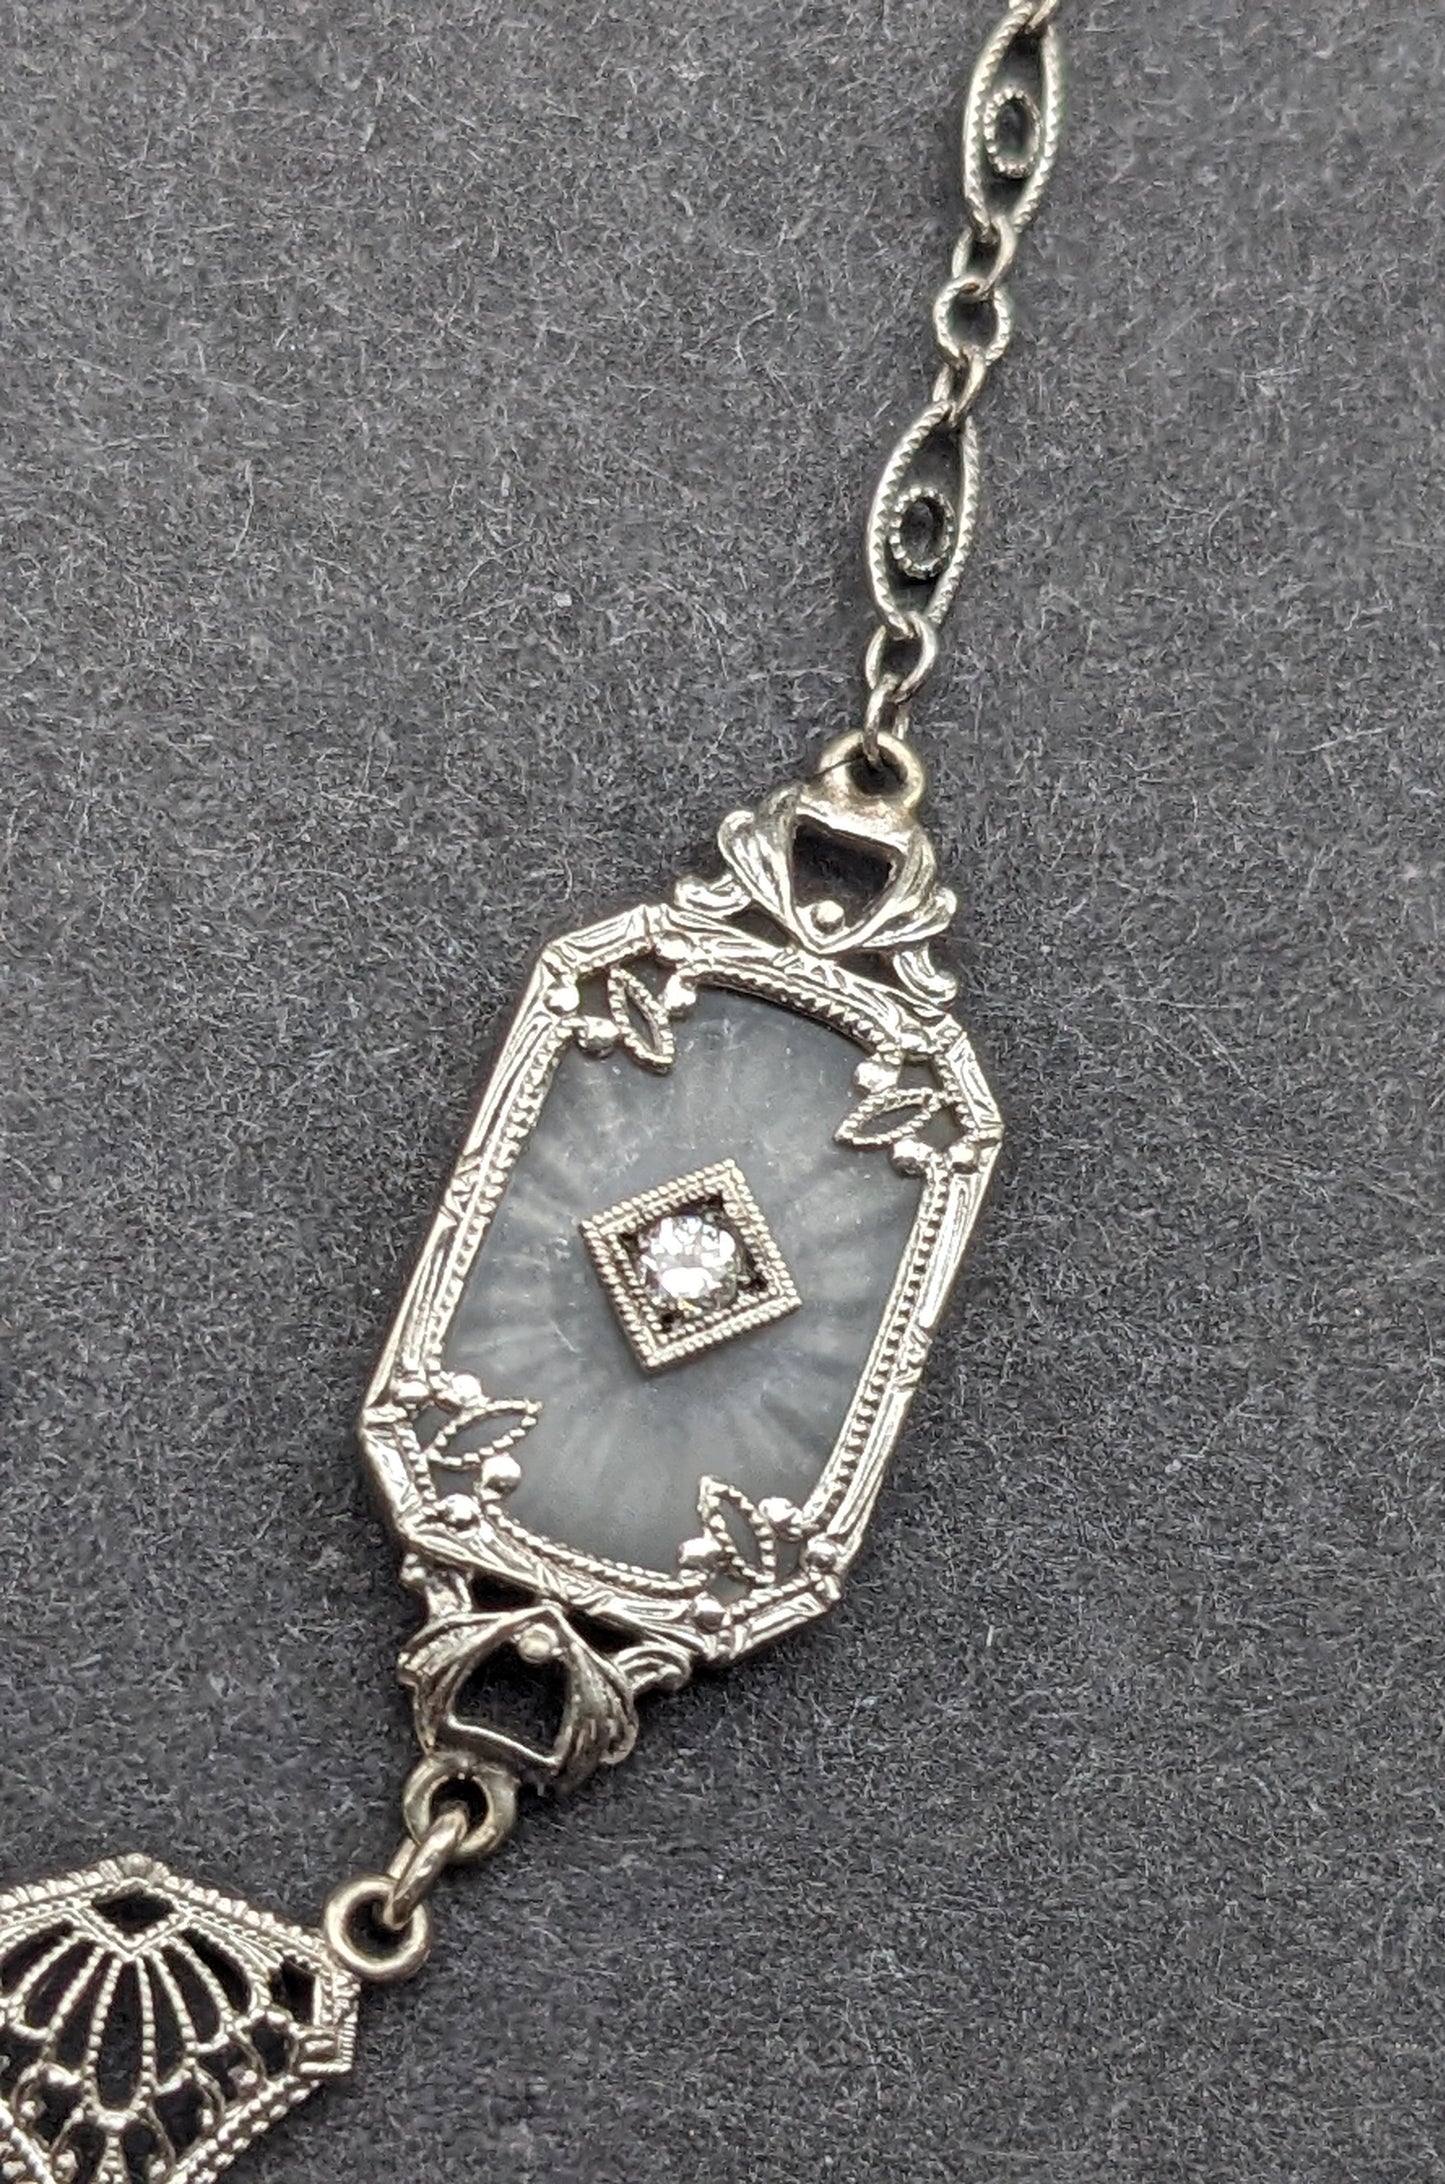 White gold Camphor glass necklace with diamonds and original chain